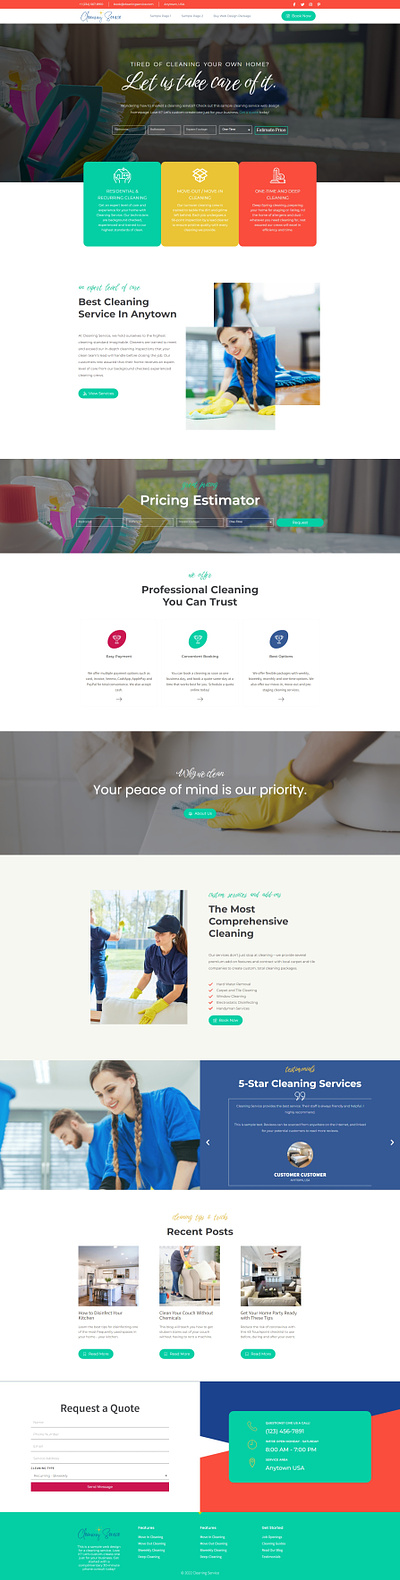 Web Design for Cleaning Service cleaning service colorful design design home service homepage design janitorial responsive design web design wordpress